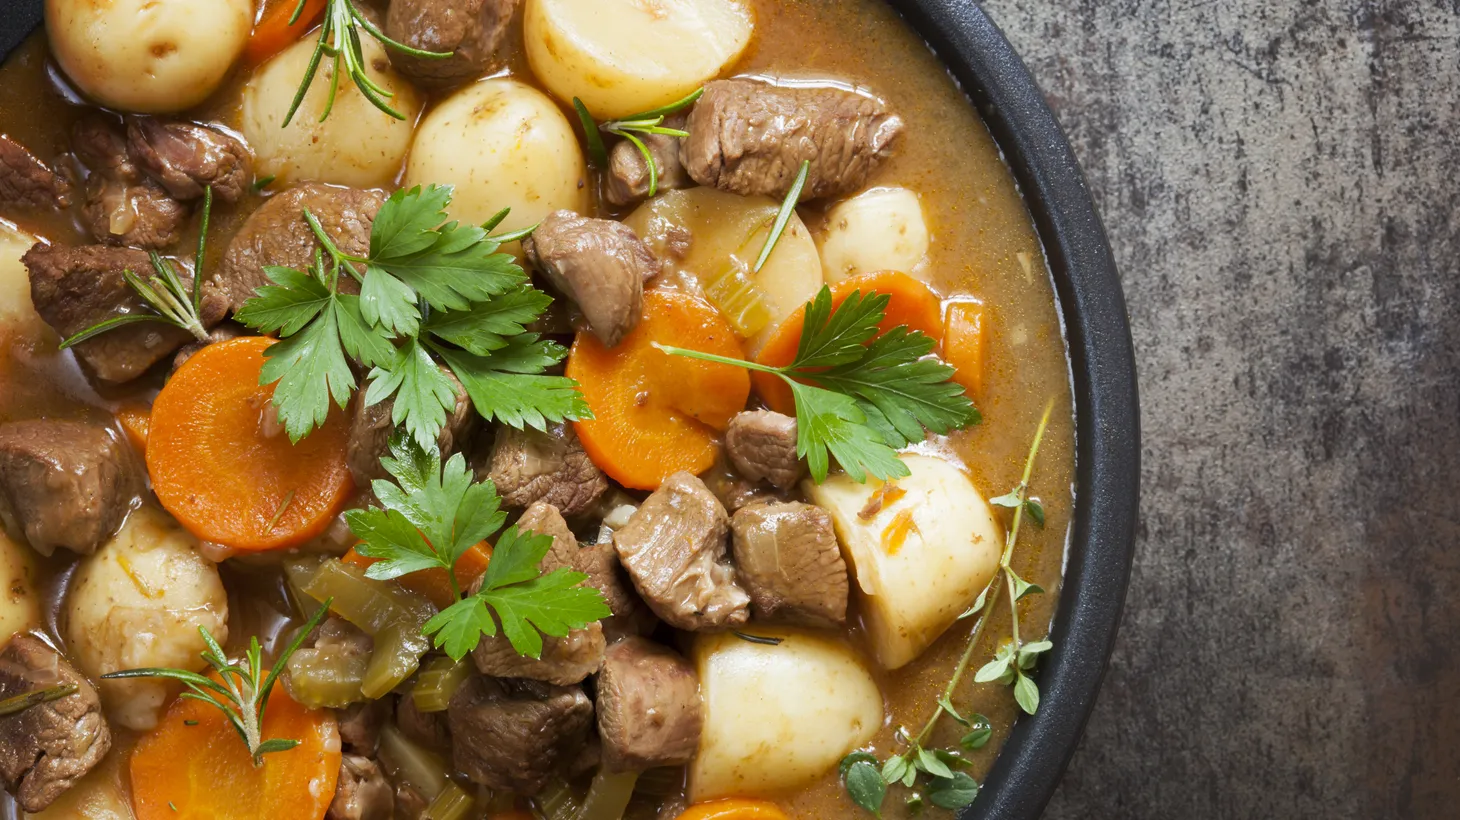 Real Irish stew is made with lamb.